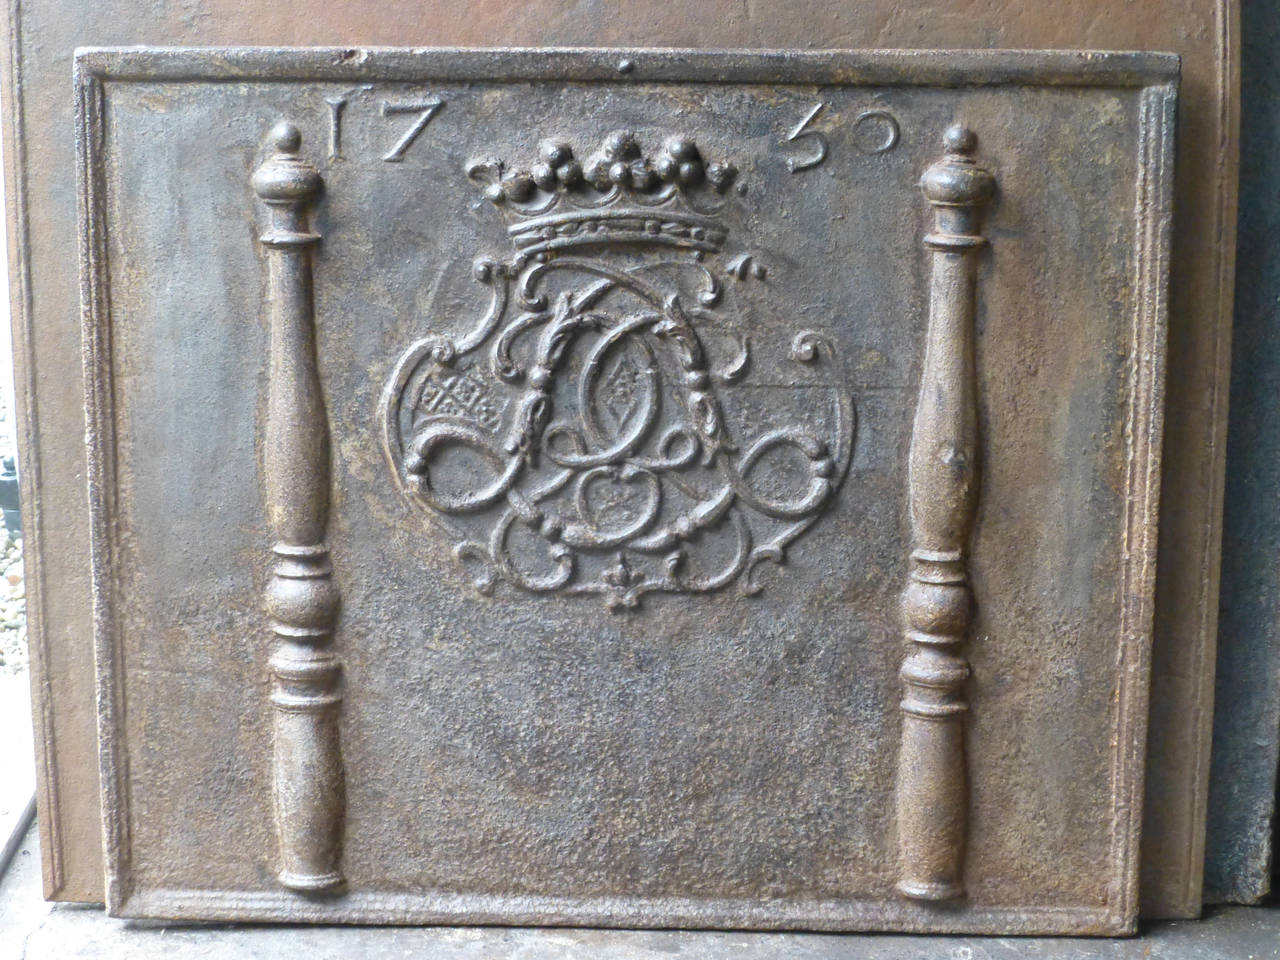 Magnificent fireback with the crown of of a marquis and his monogram

We always have 500+ antique and vintage firebacks in stock in all dimensions, styles and designs. Contact us our current stock and availability.